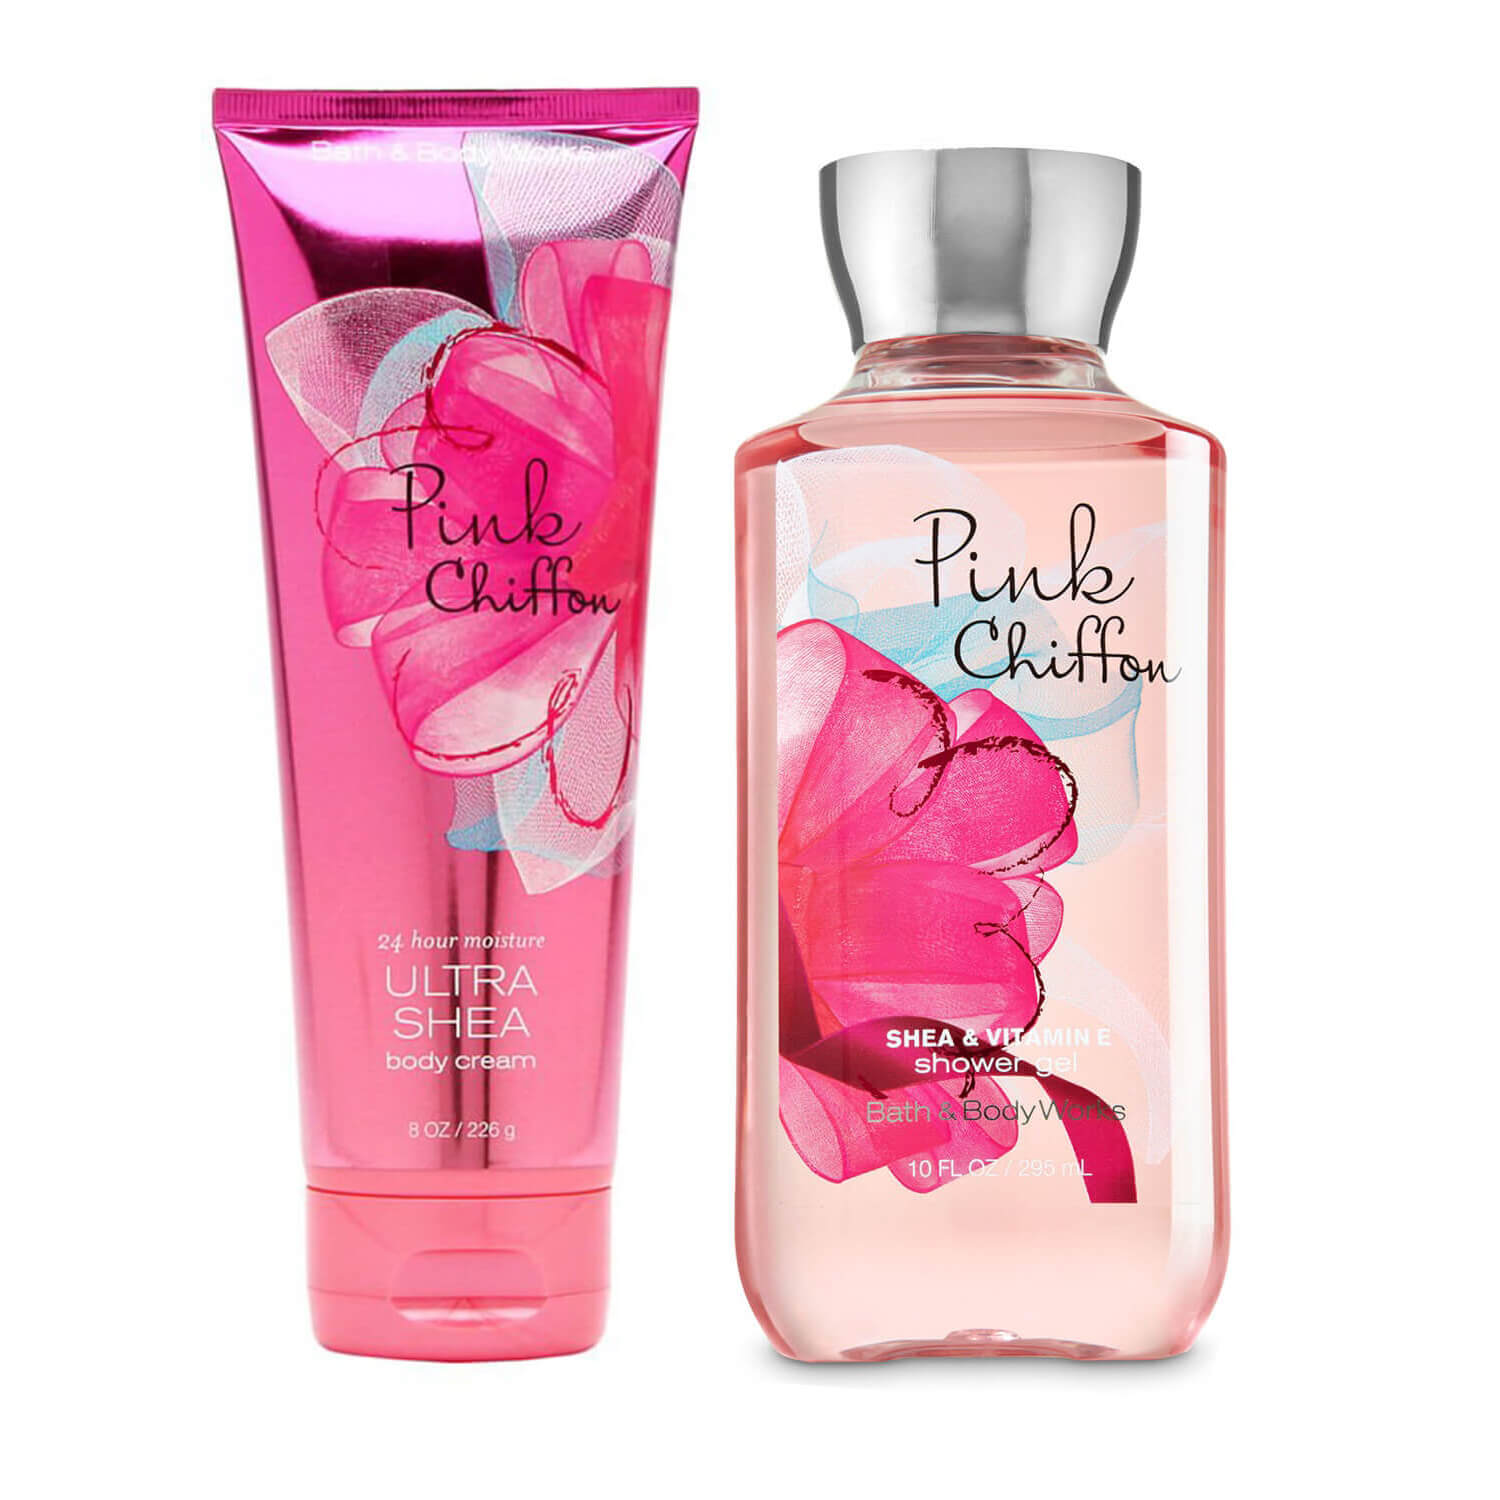 bath and body bundle in pink chiffon fragrance available at heygirl.pk for delivery in Pakistan